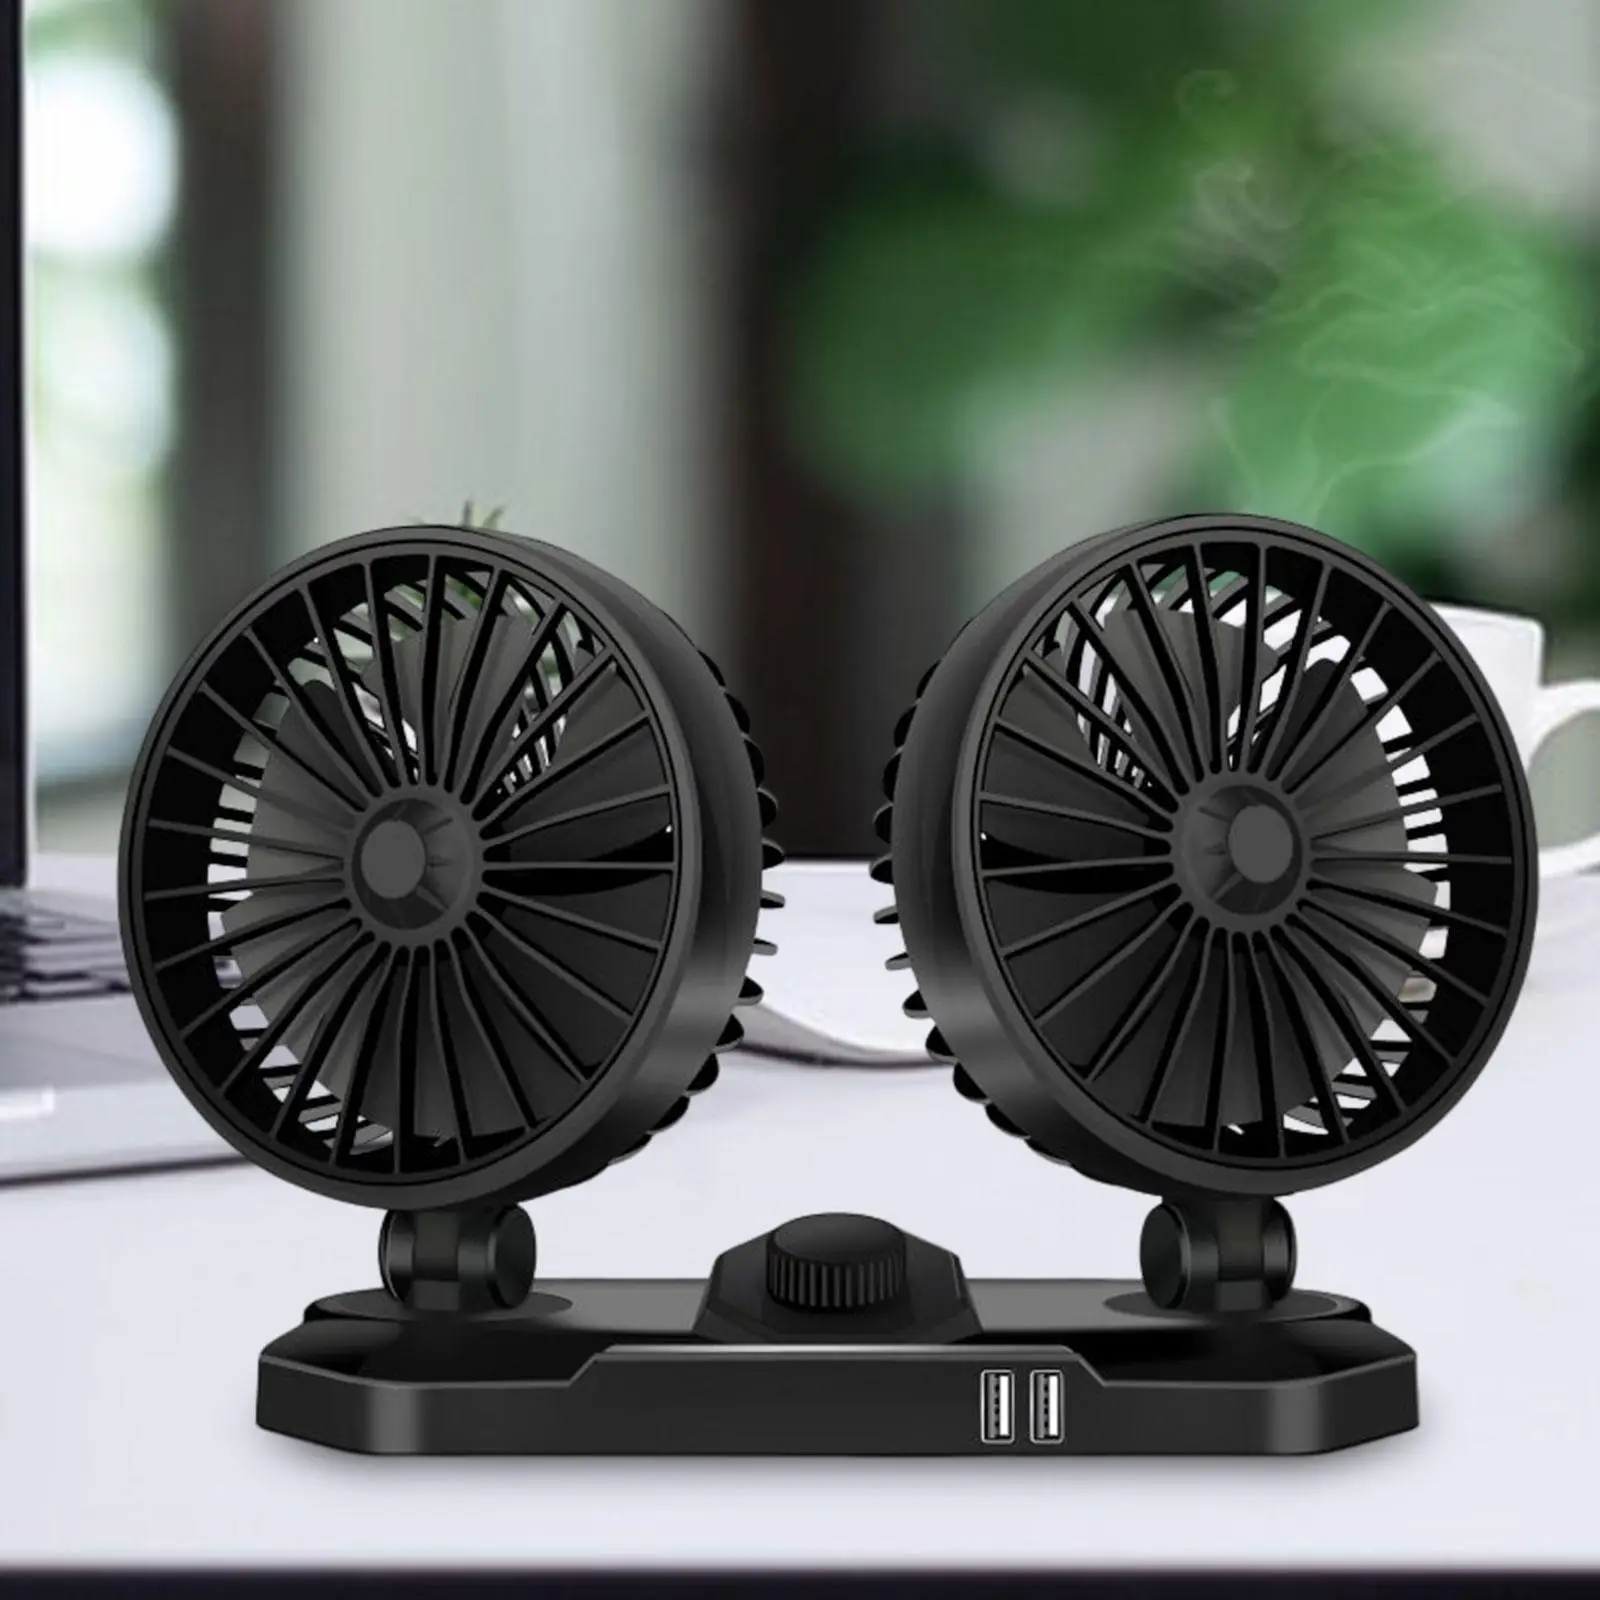 Car Cooling Fans Cooling air Fan for Dashdoard Vehicles Home